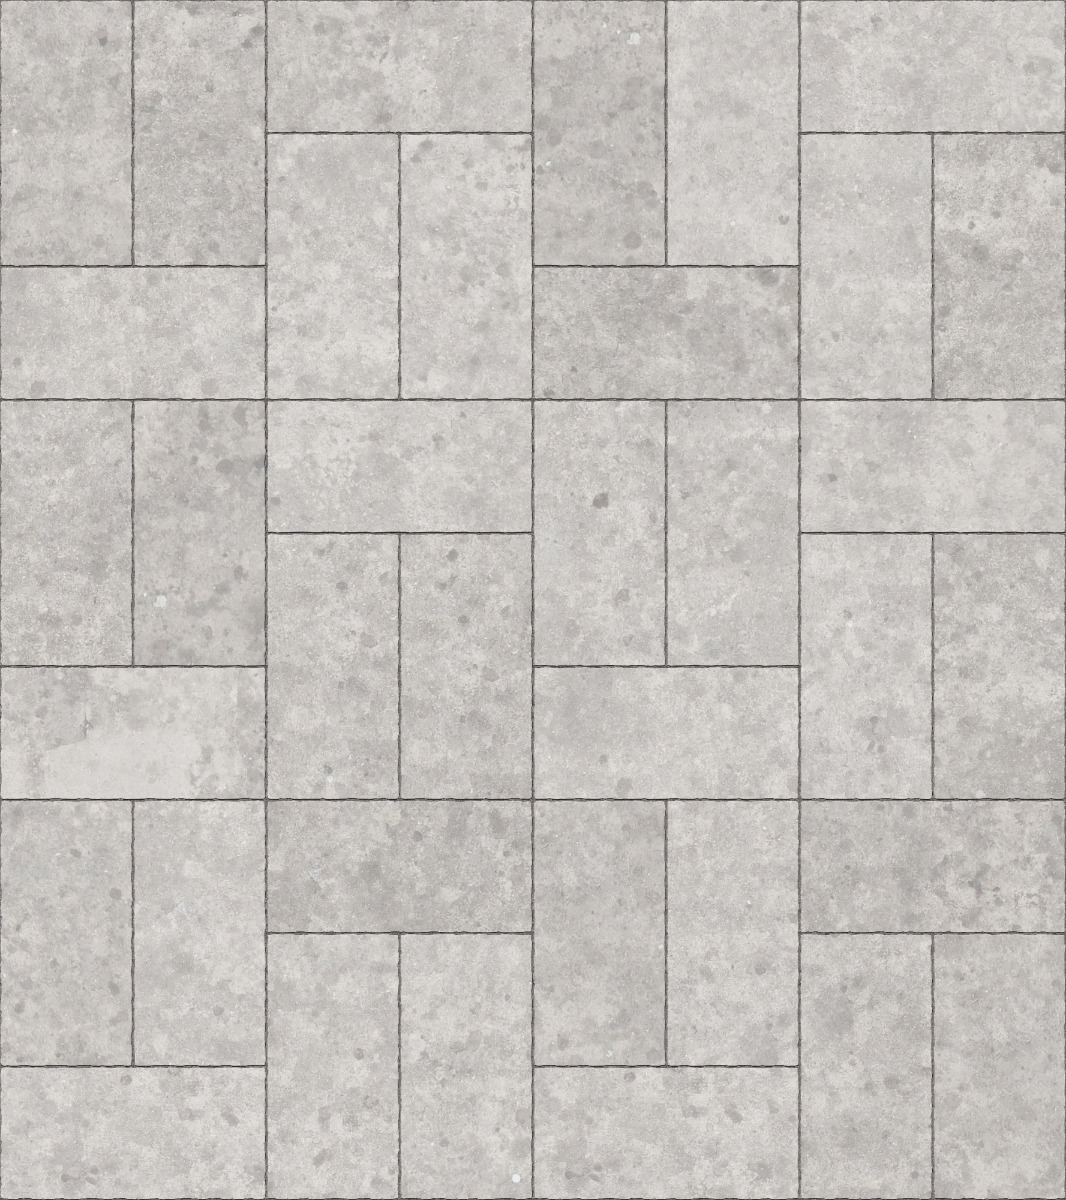 A seamless concrete texture with concrete blocks arranged in a Single Basketweave pattern